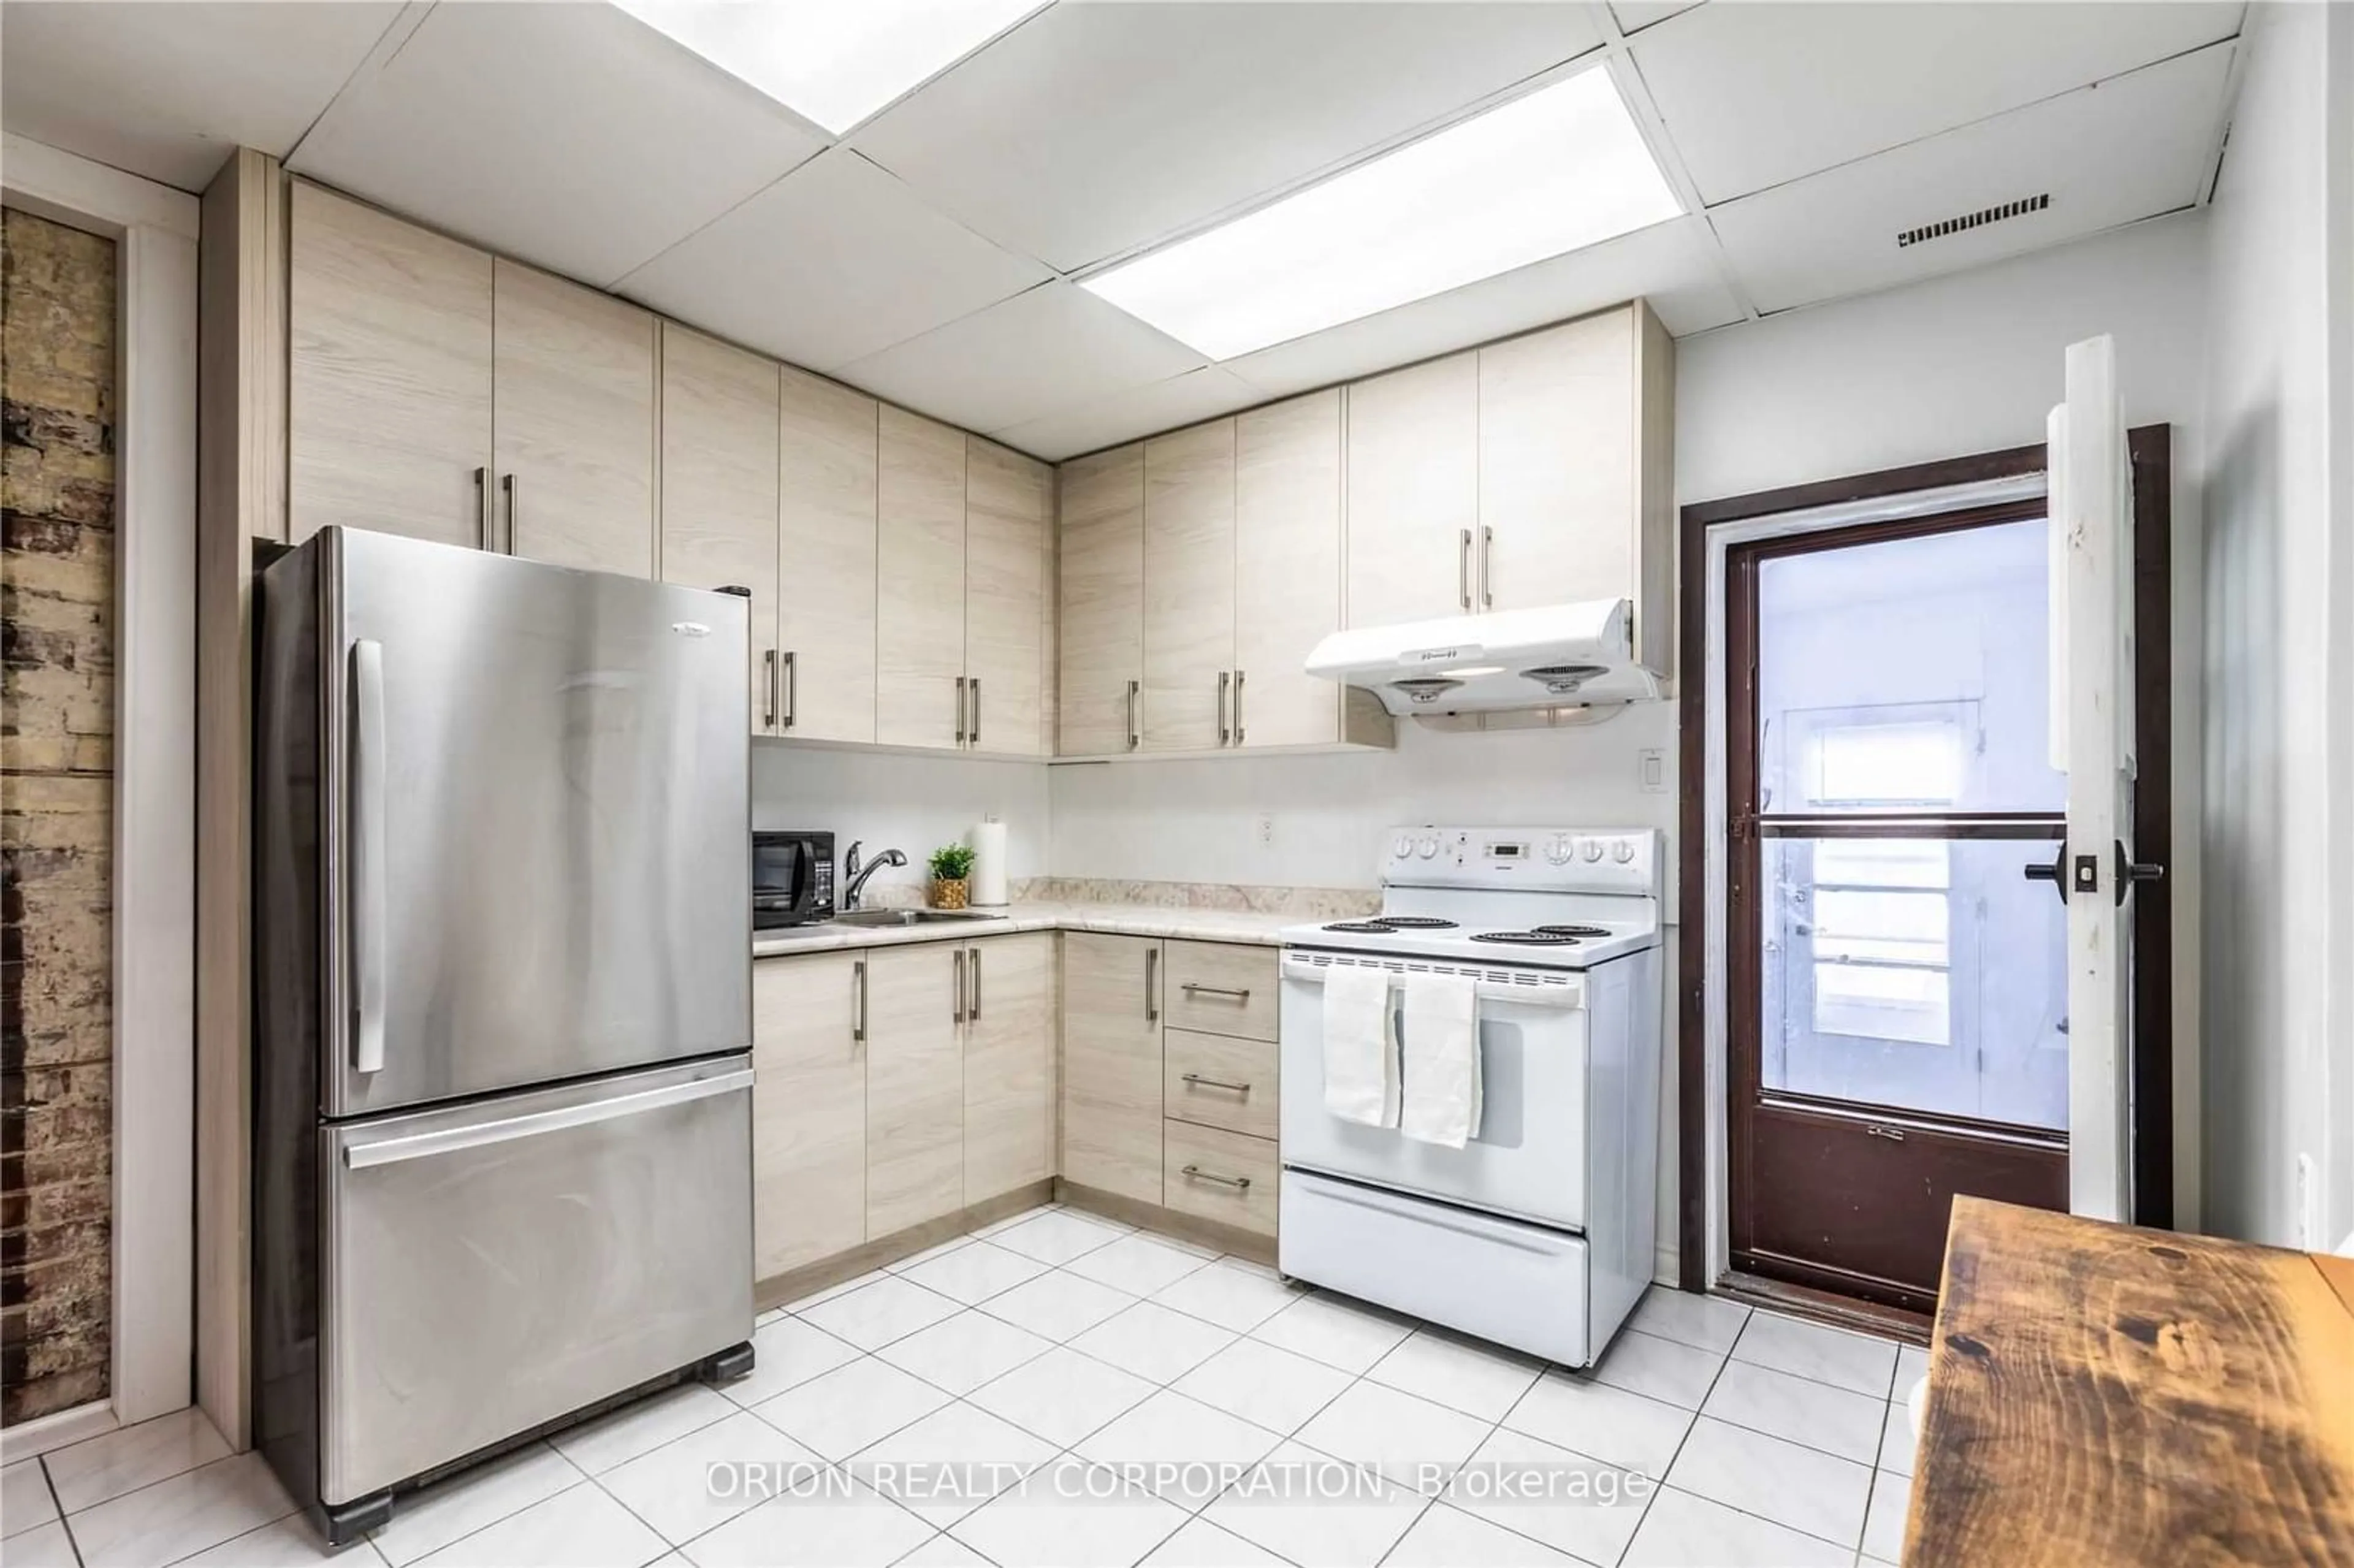 Standard kitchen for 324 Woodfield Rd, Toronto Ontario M4L 2X1